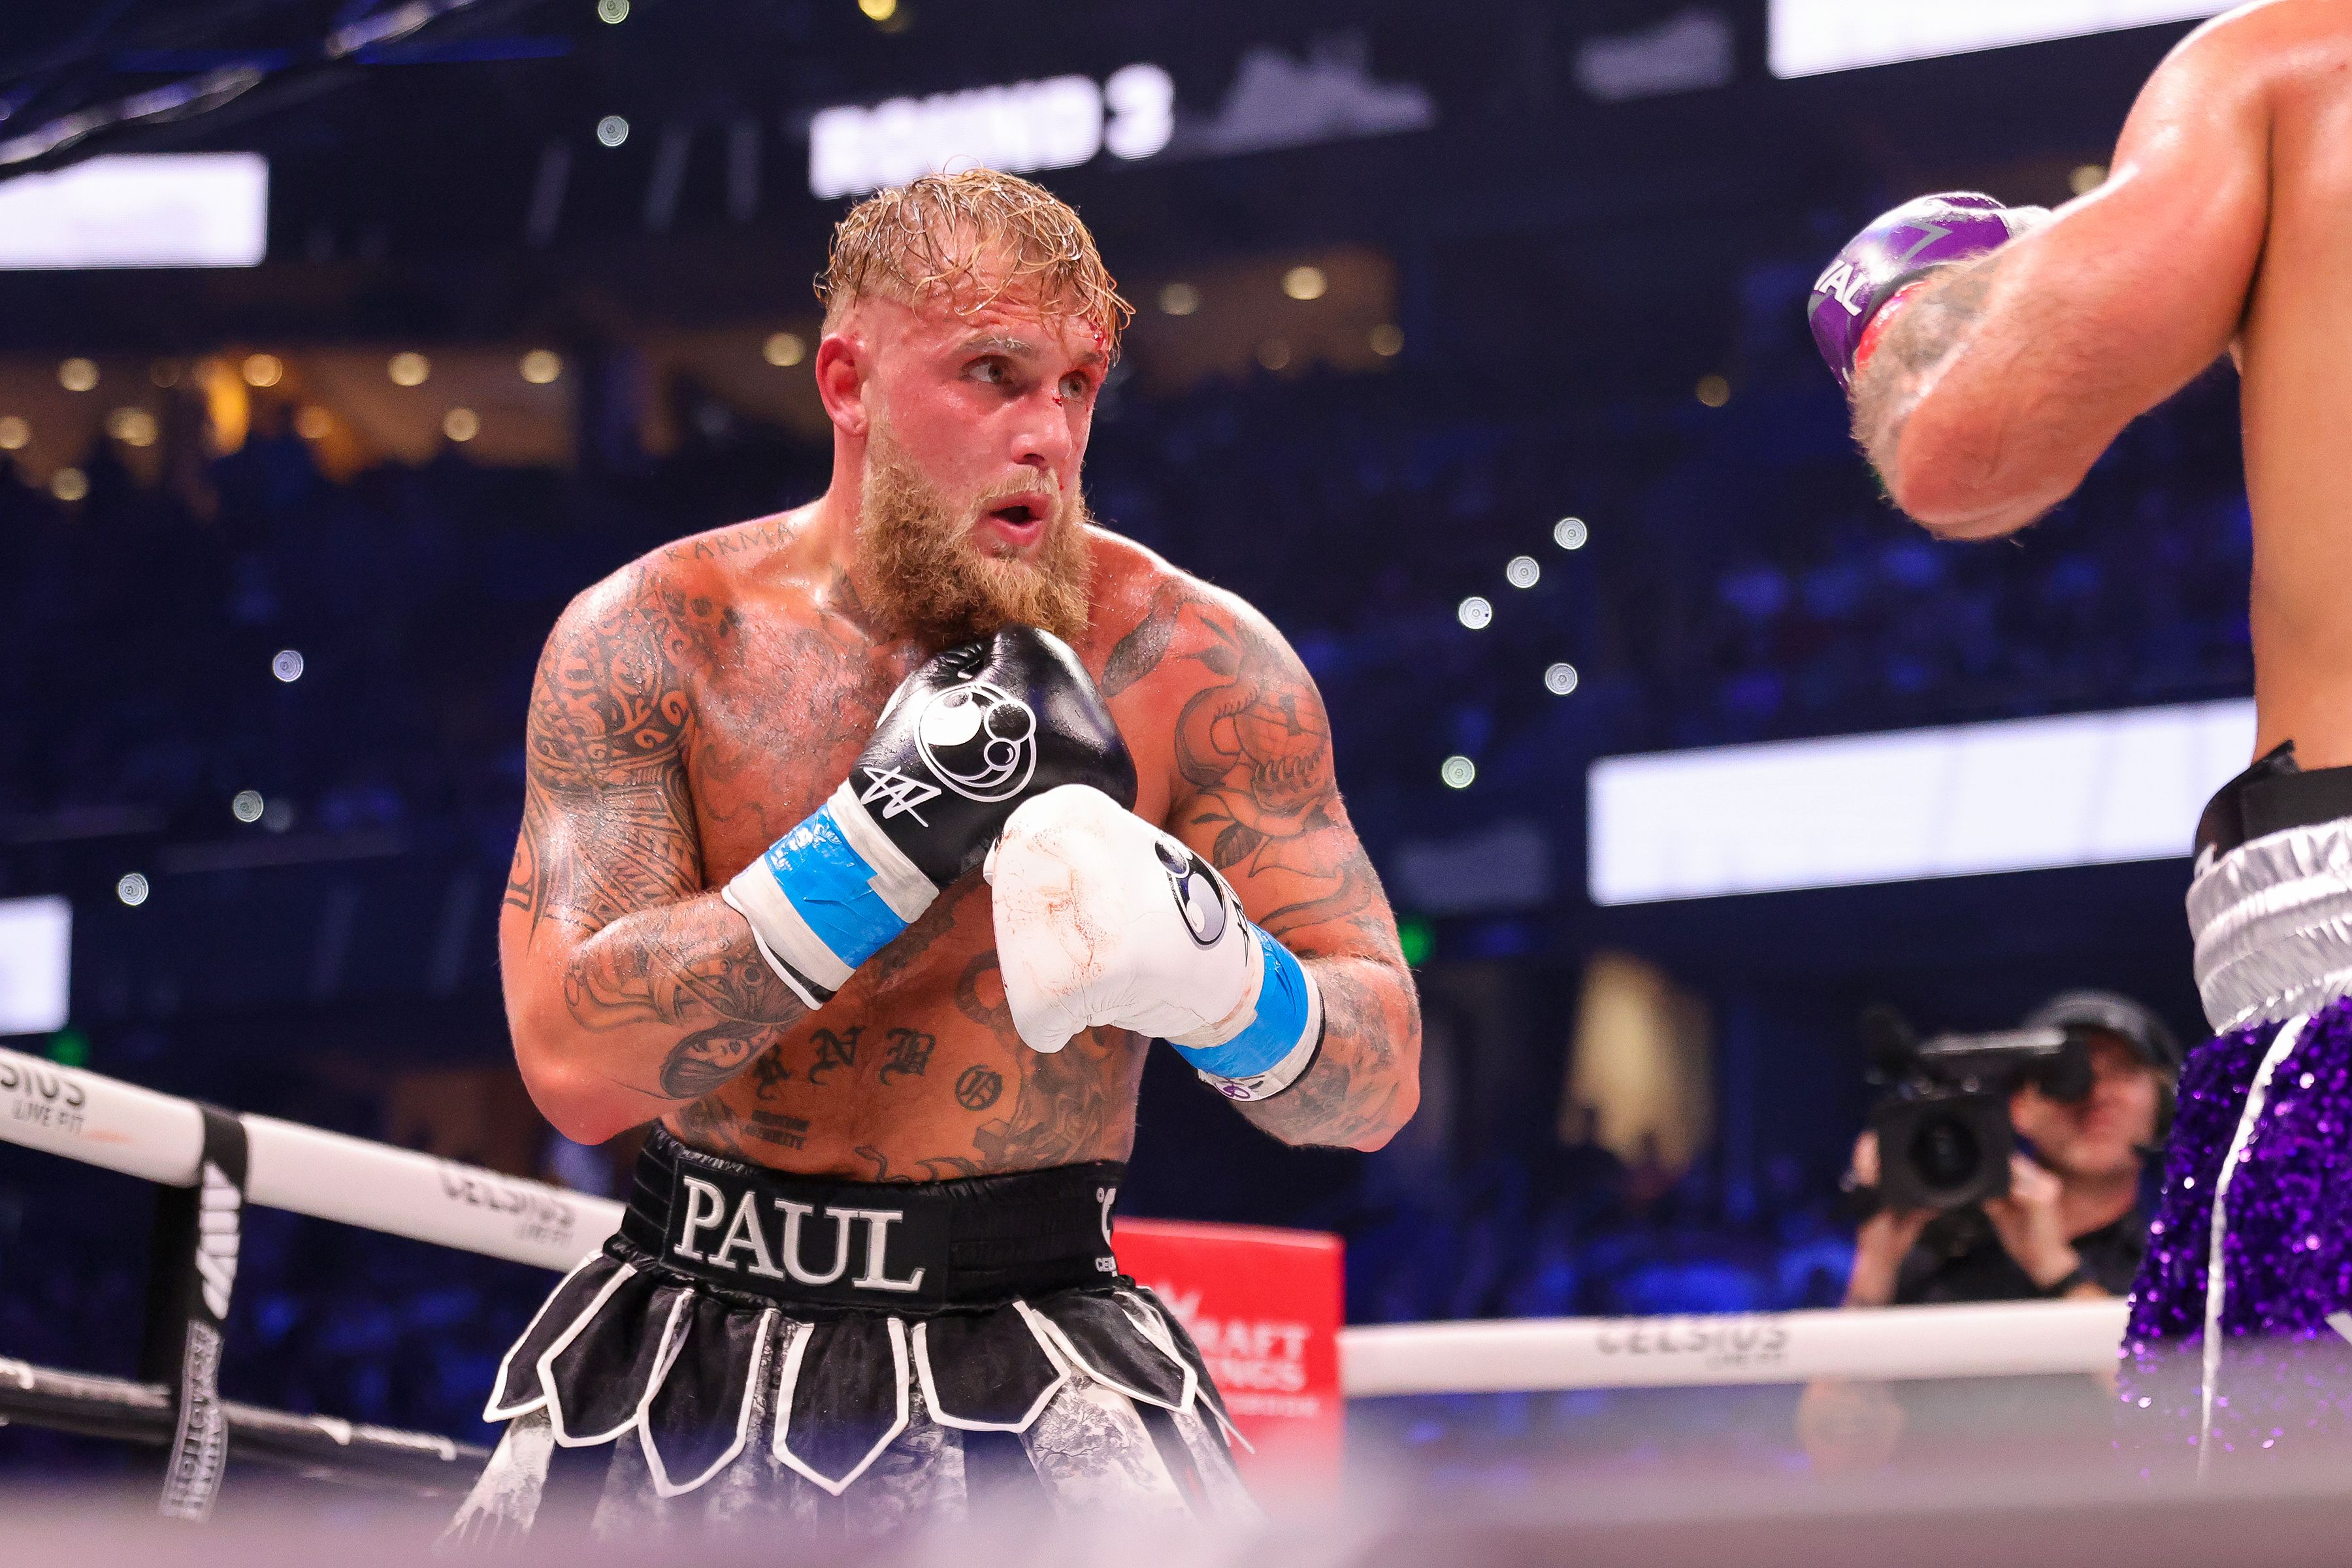 Now he wants to fight YouTuber-turned-boxer Jake Paul